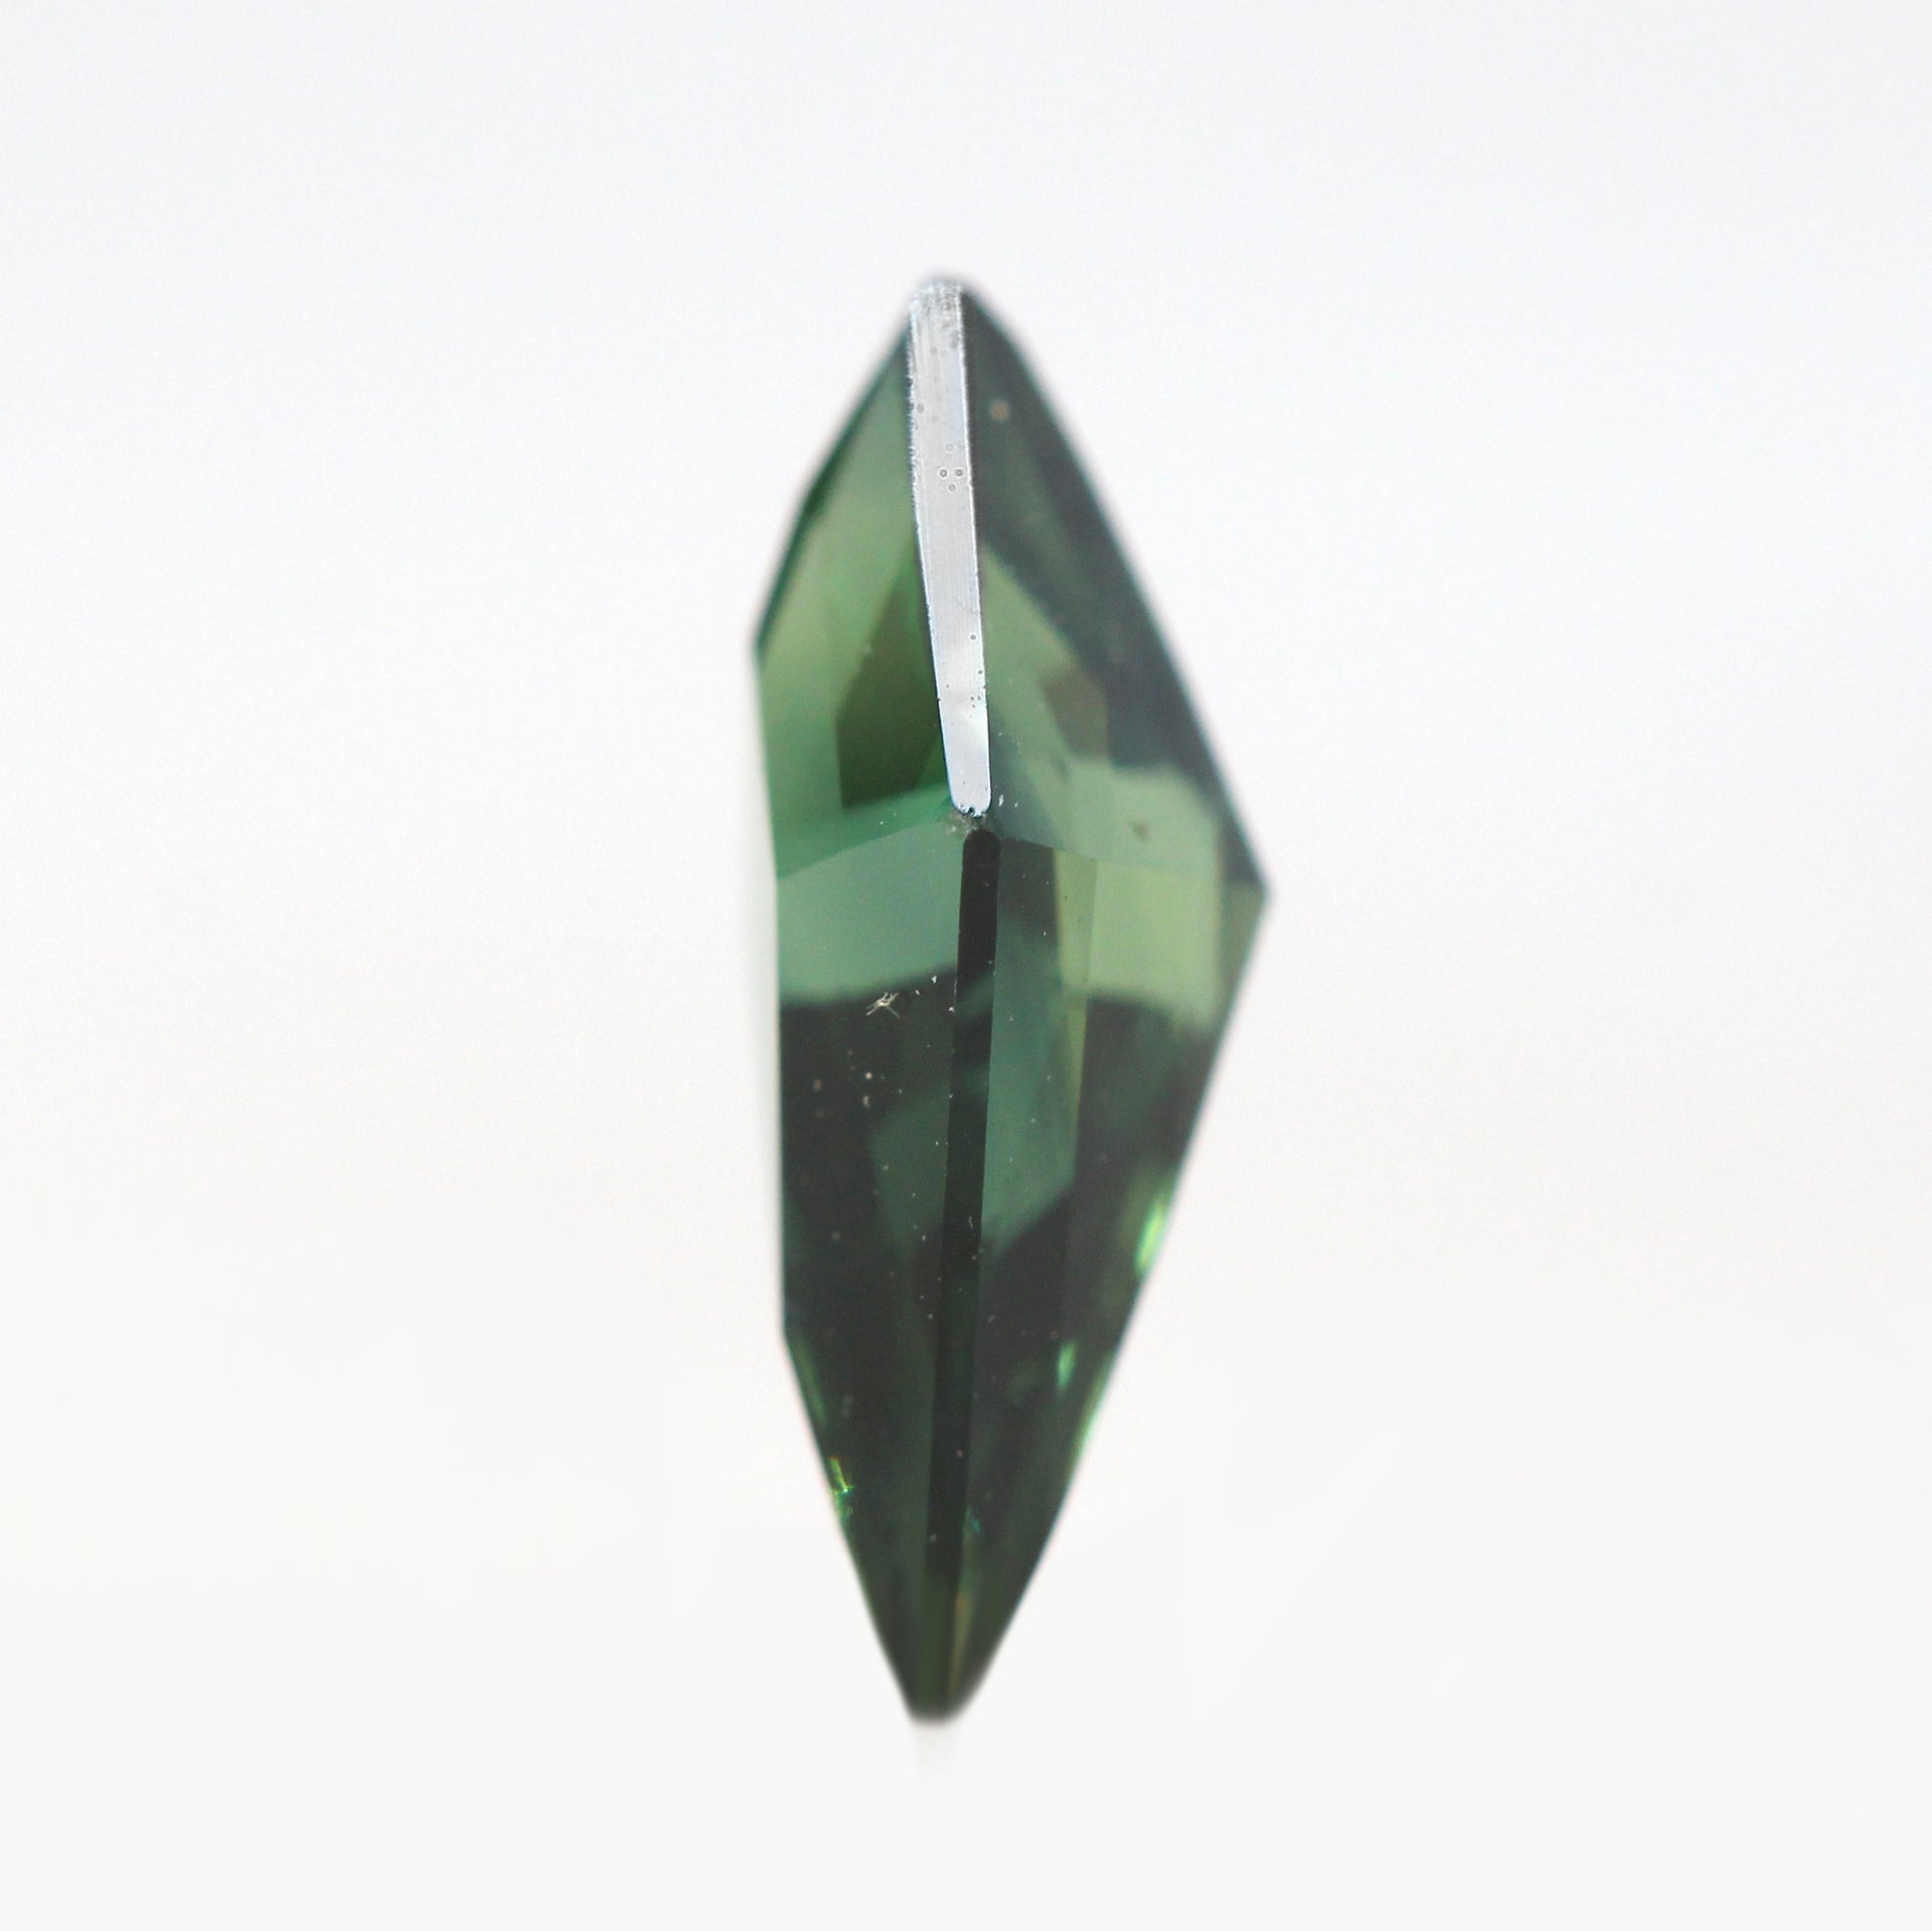 1.40 Carat Green Kite Sapphire for Custom Work - Inventory Code GKSAP140 - Midwinter Co. Alternative Bridal Rings and Modern Fine Jewelry